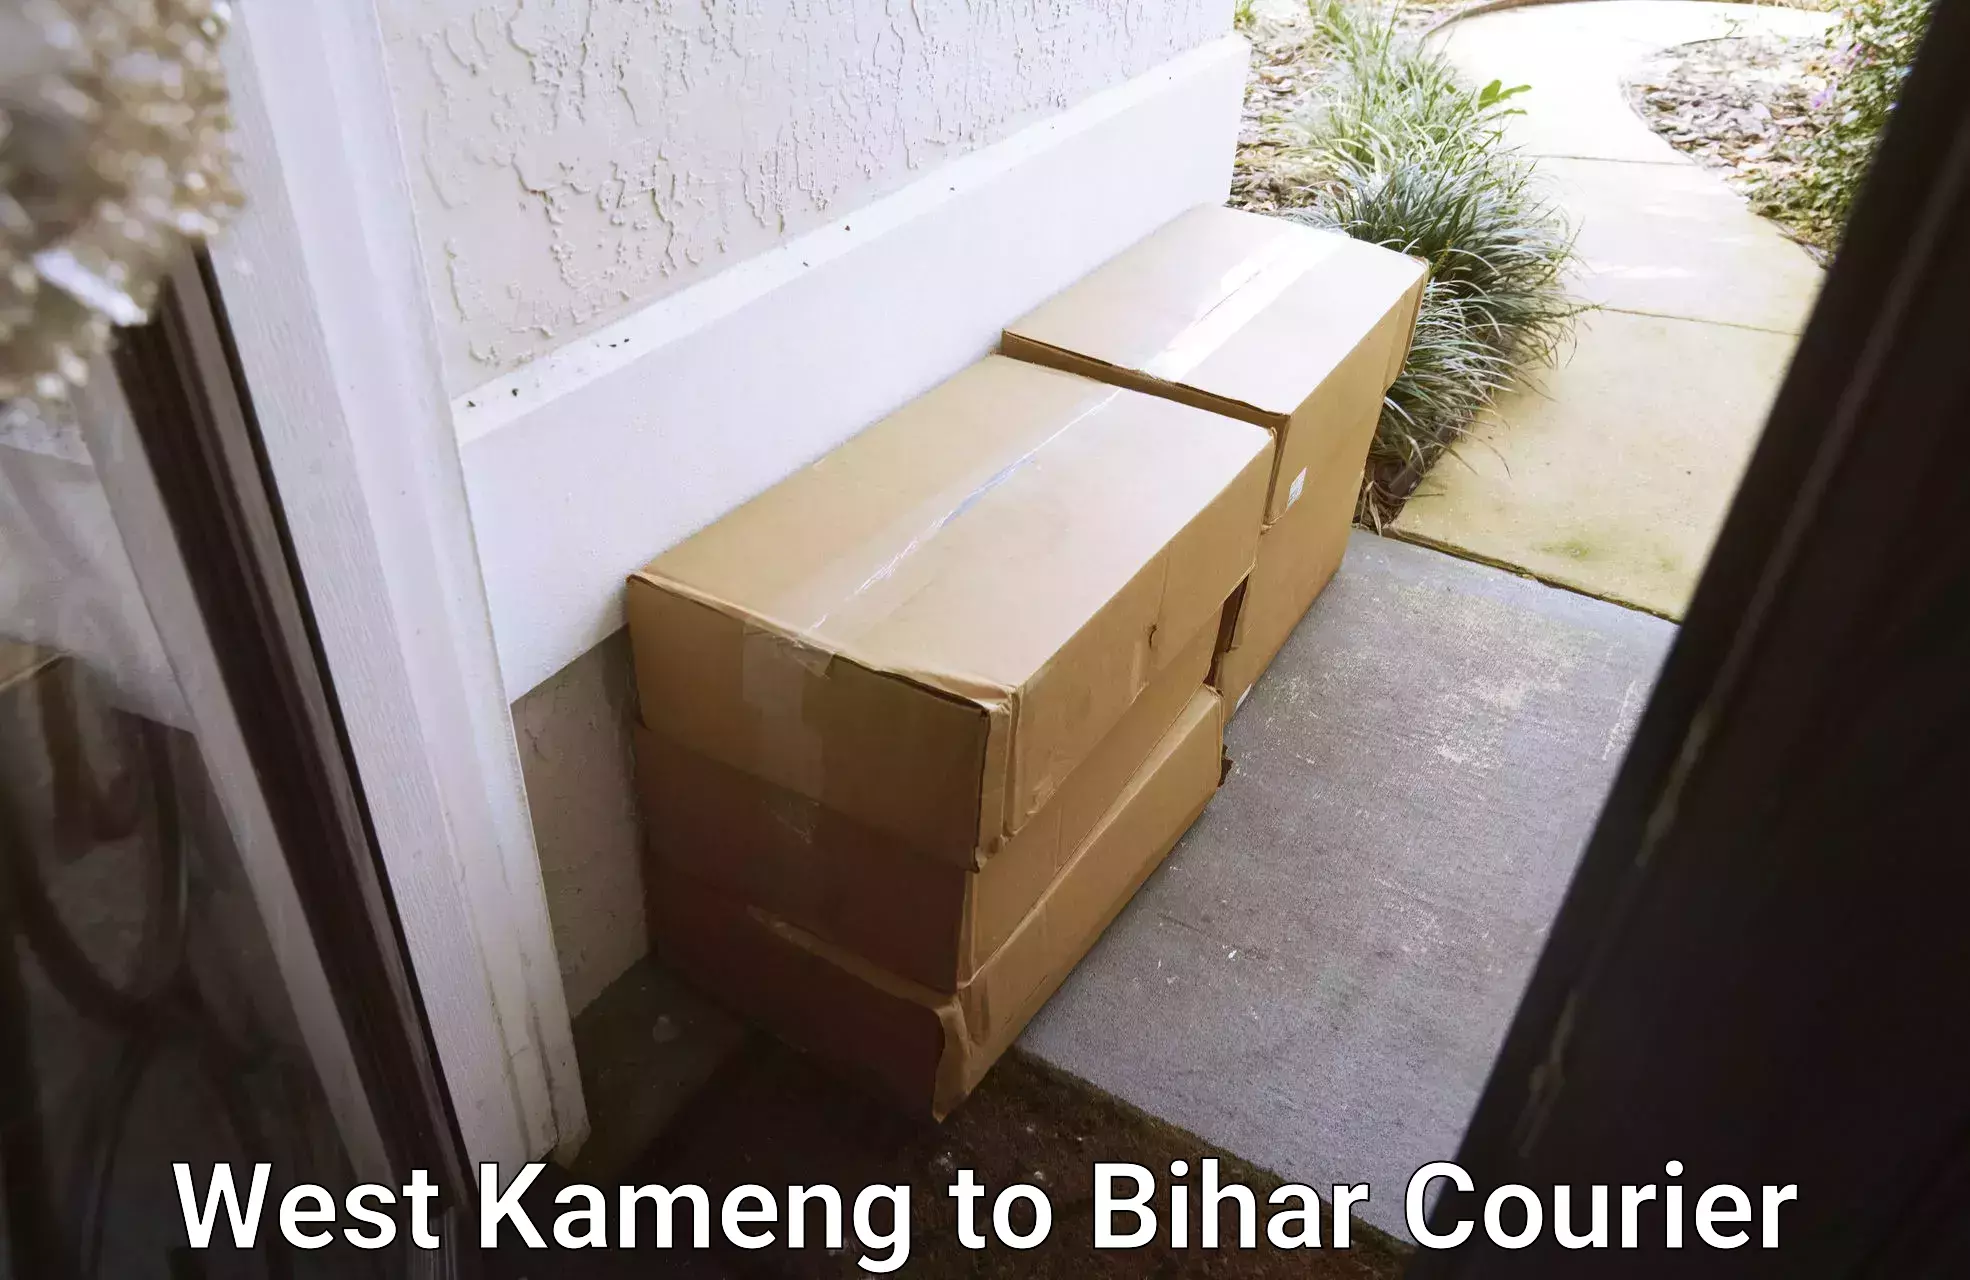 Courier tracking online West Kameng to Sirdala